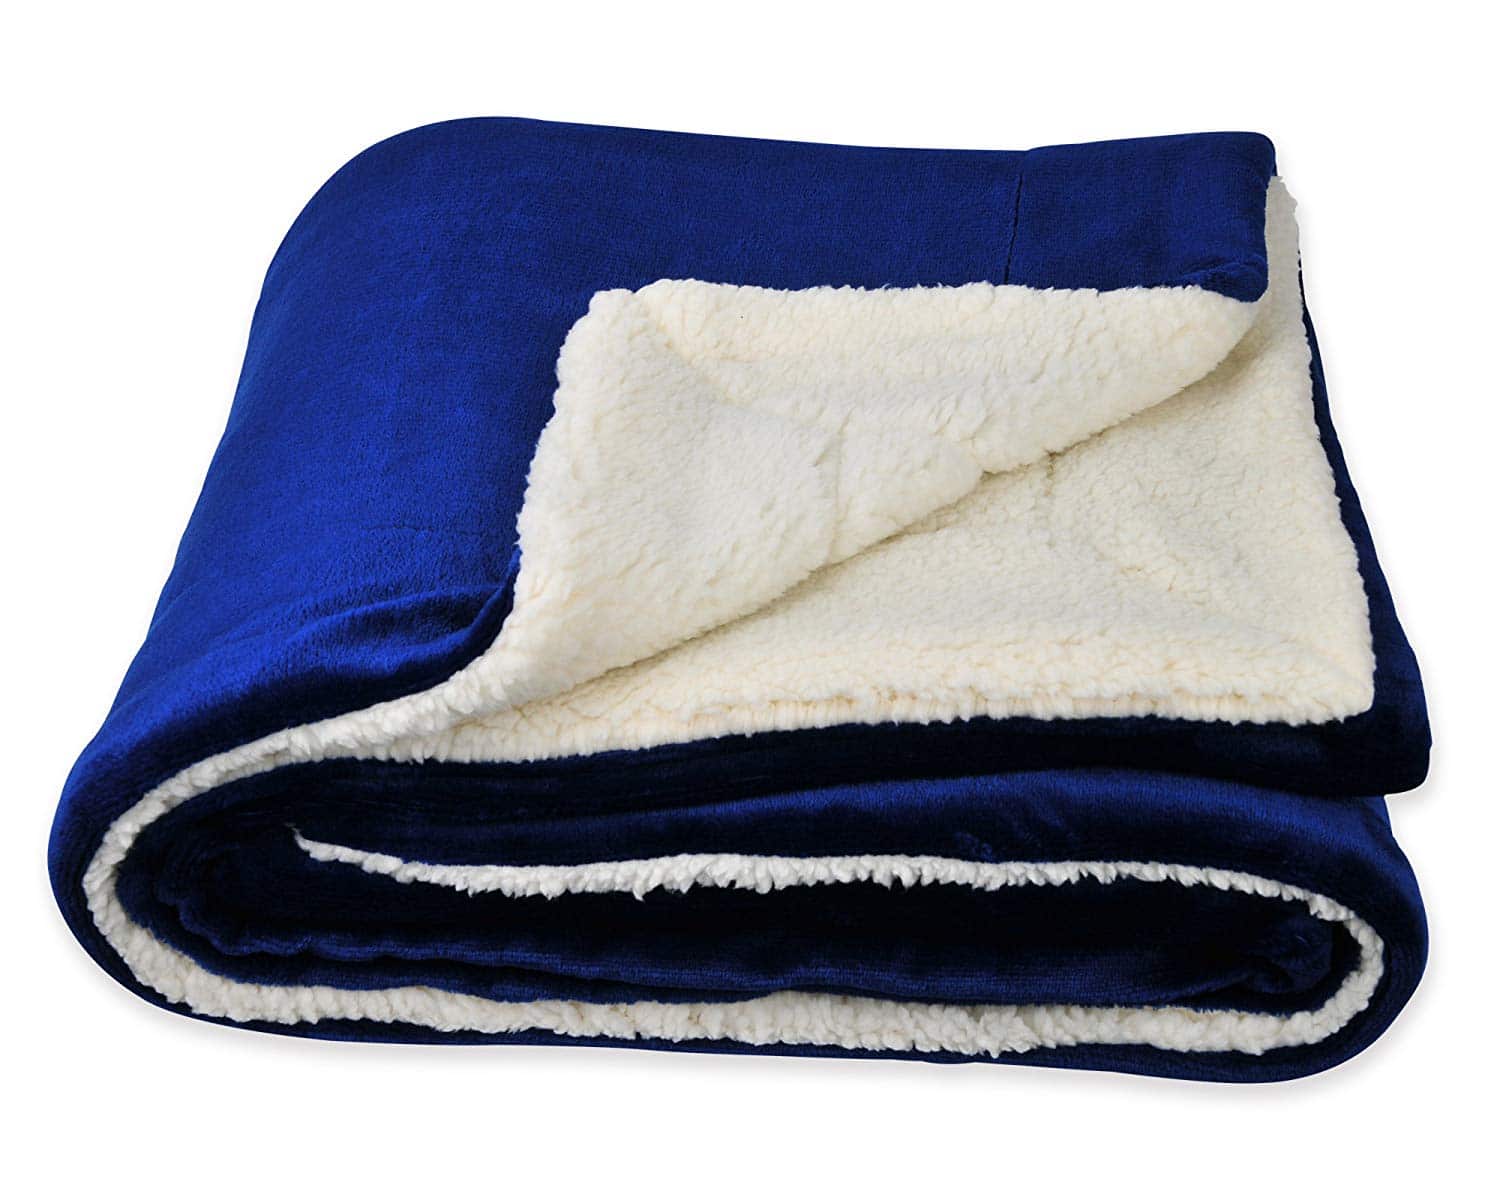 best heating blankets for cars, heated car blanket, car blanket,  electric blanket for car, car blanket